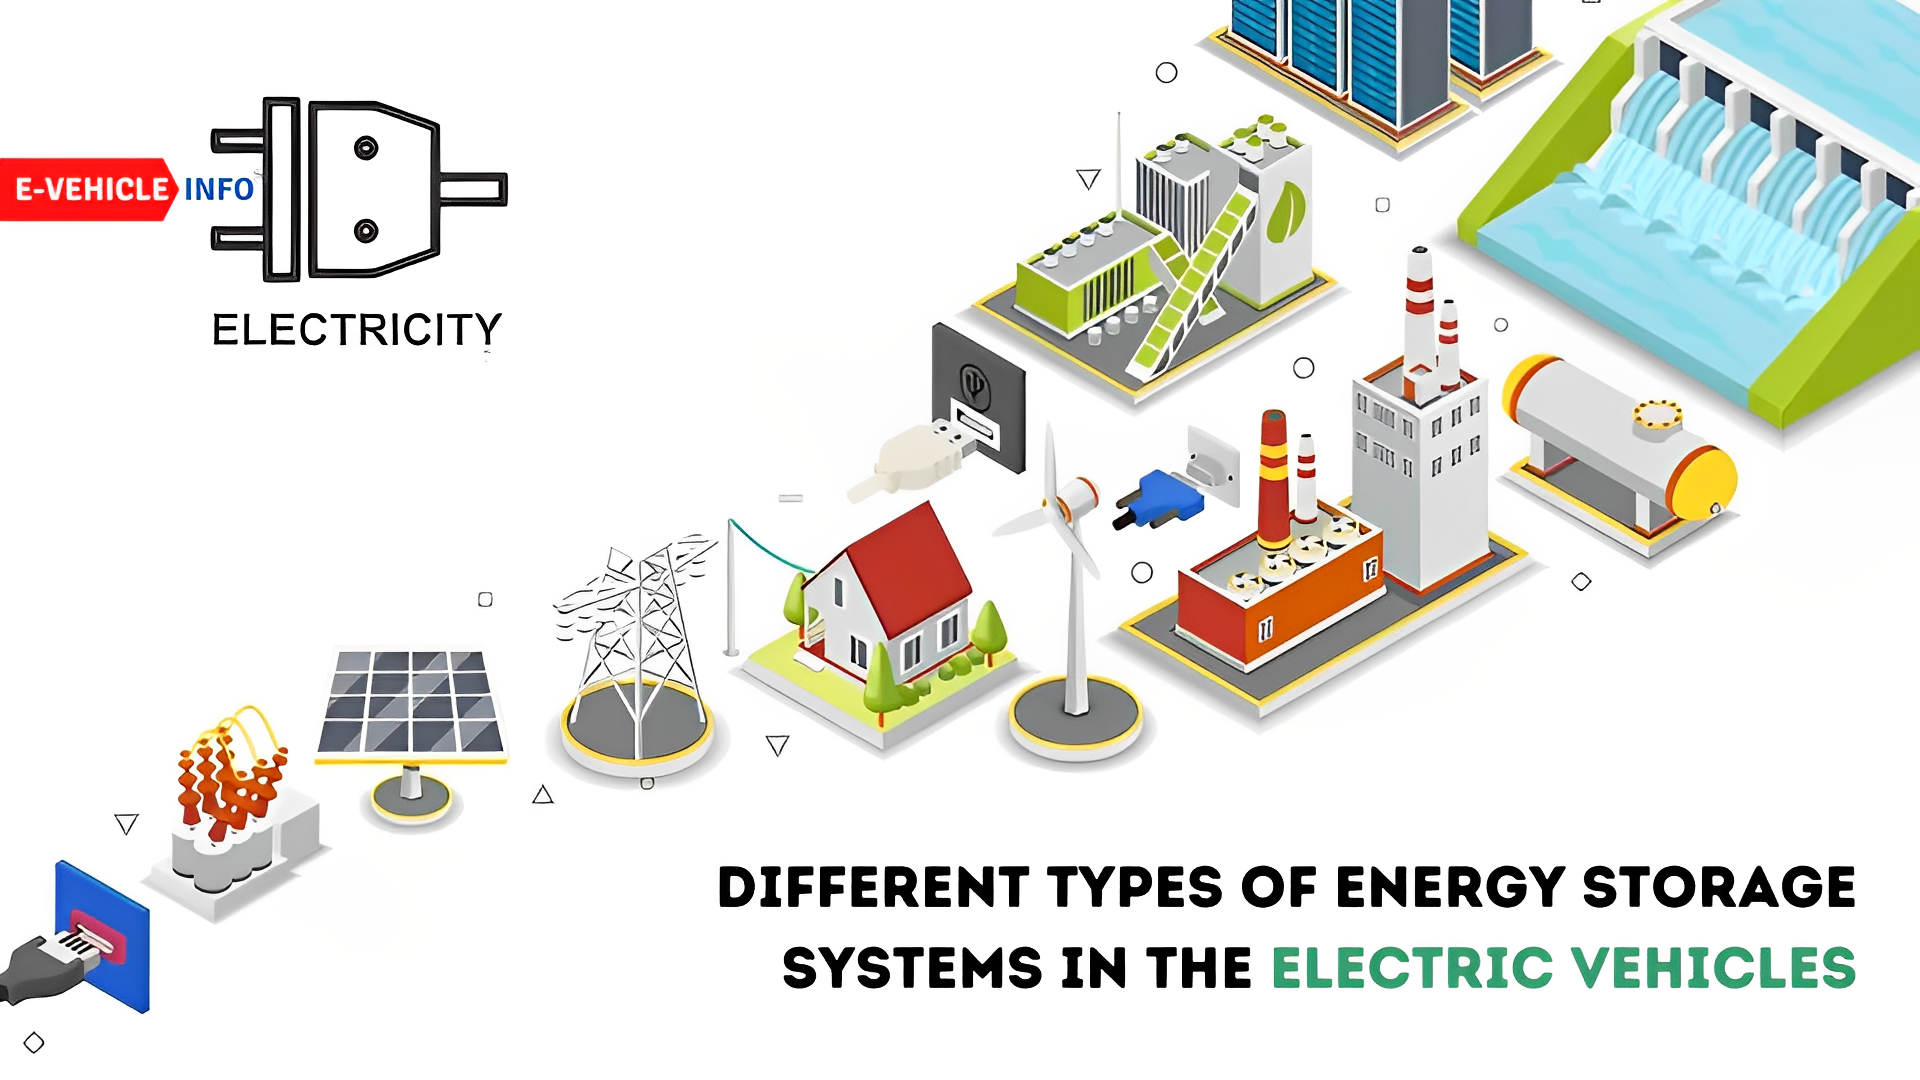 https://e-vehicleinfo.com/different-types-of-energy-storage-systems-in-electric-vehicles/